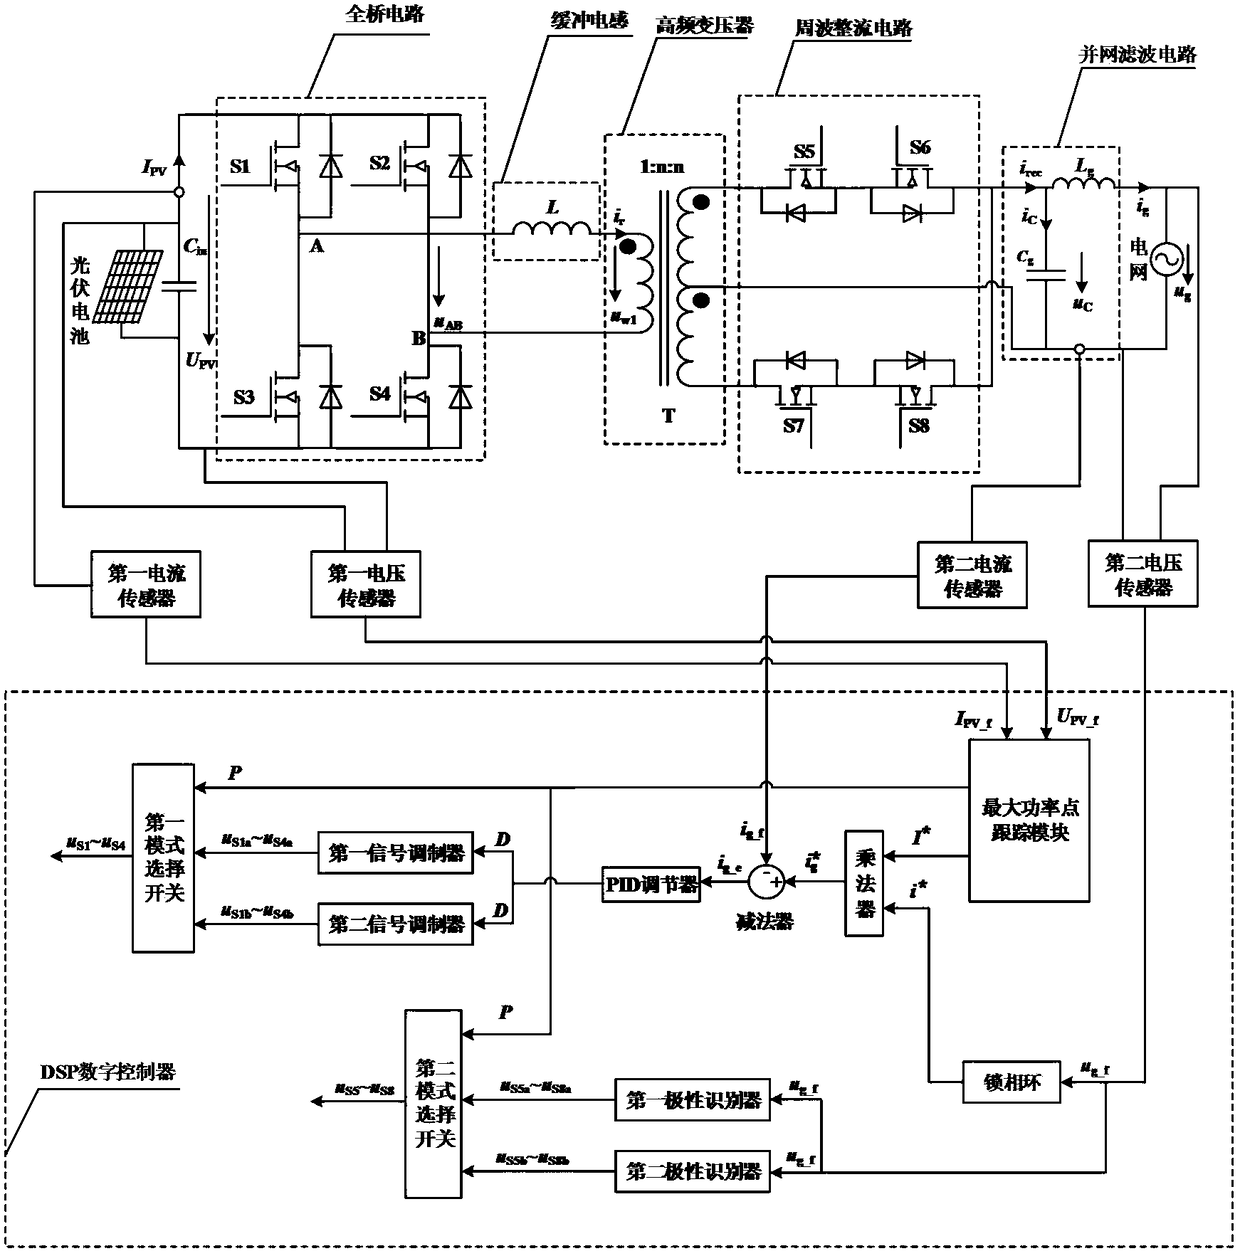 Topology-variable micro-inverter and its digital control device